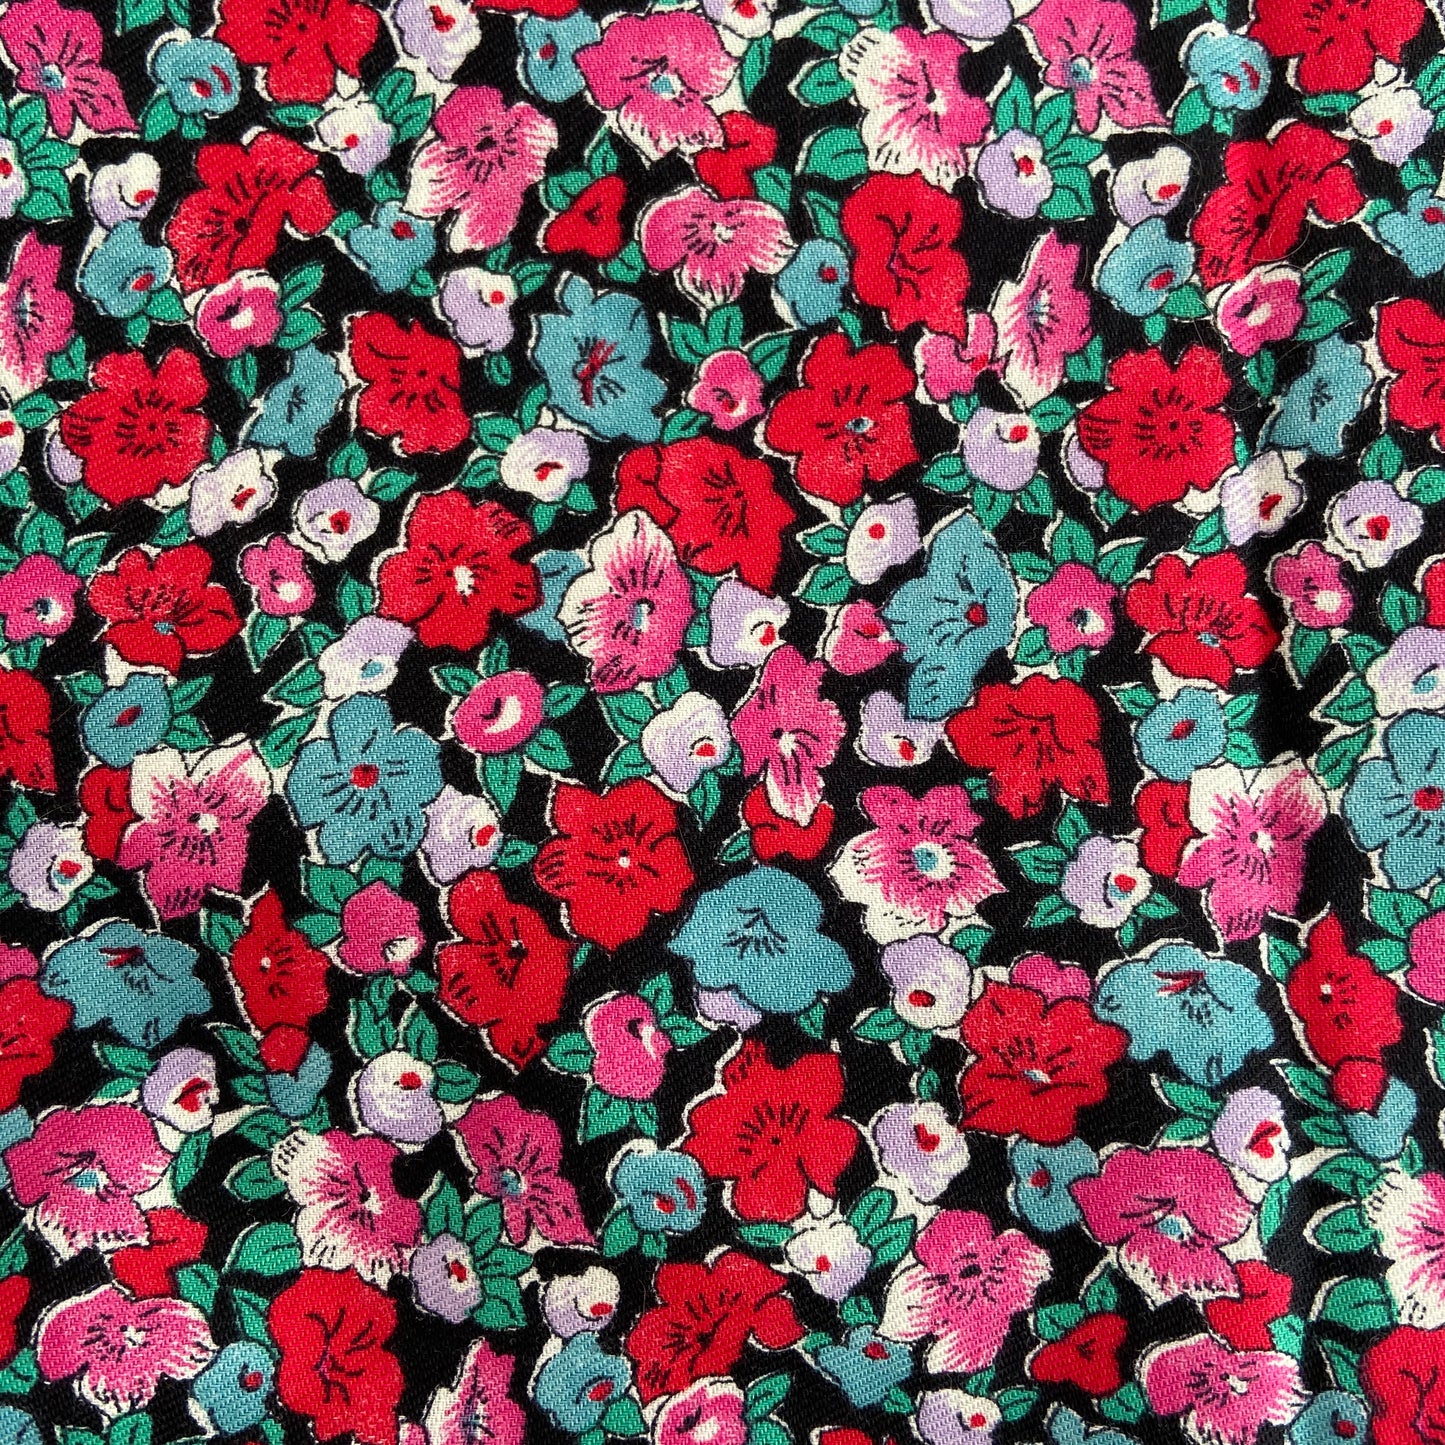 Vintage Floral FABRIC Bright COTTON Craft Sewing LOVELY